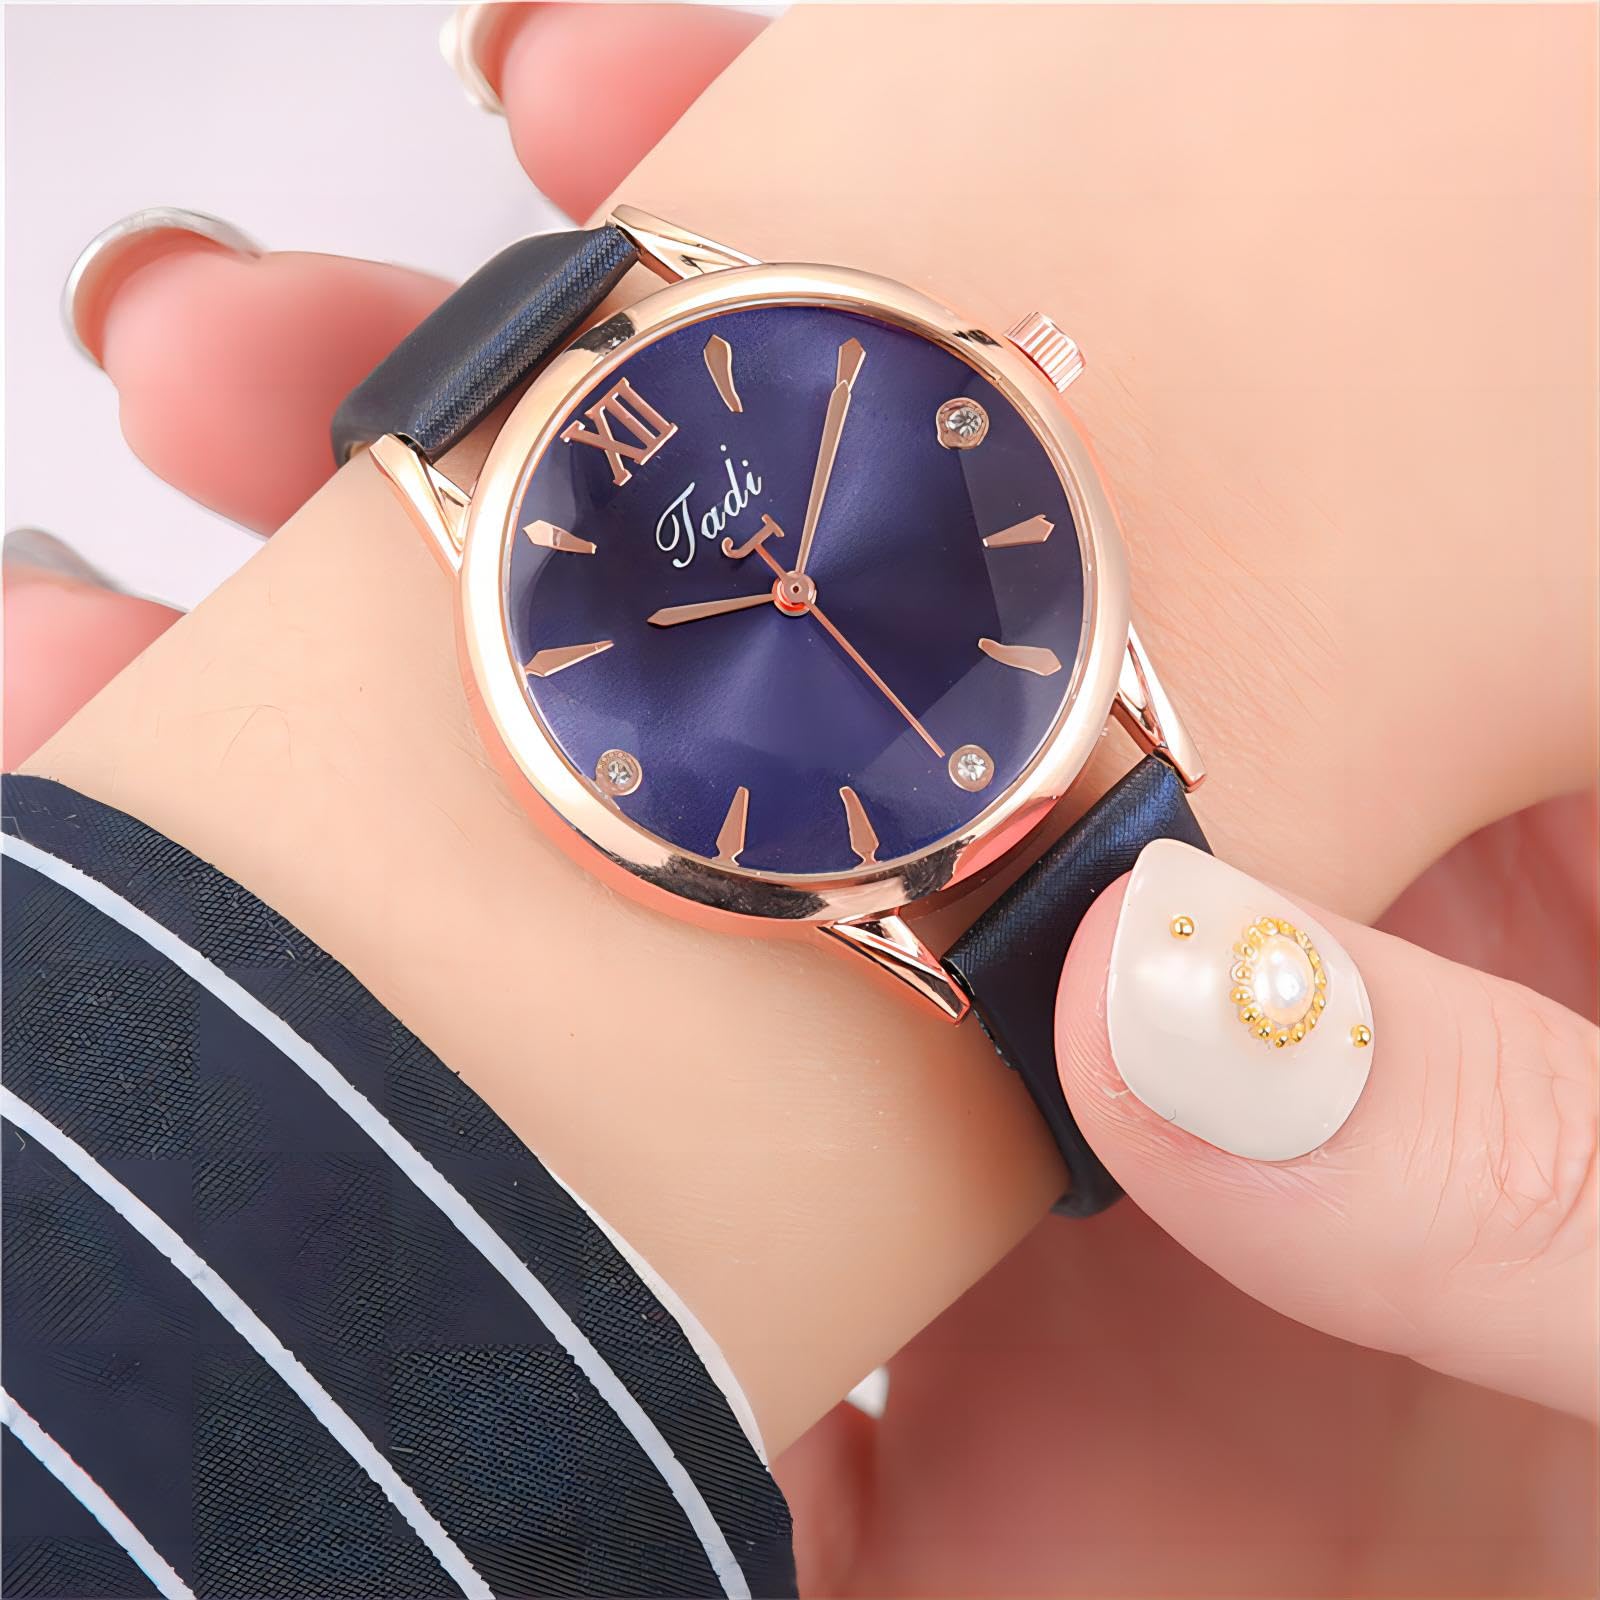 TPSOUM Wrist Watch for Women, Classic Designed Quartz Analog Women's Watch with Breathable Leather Strap